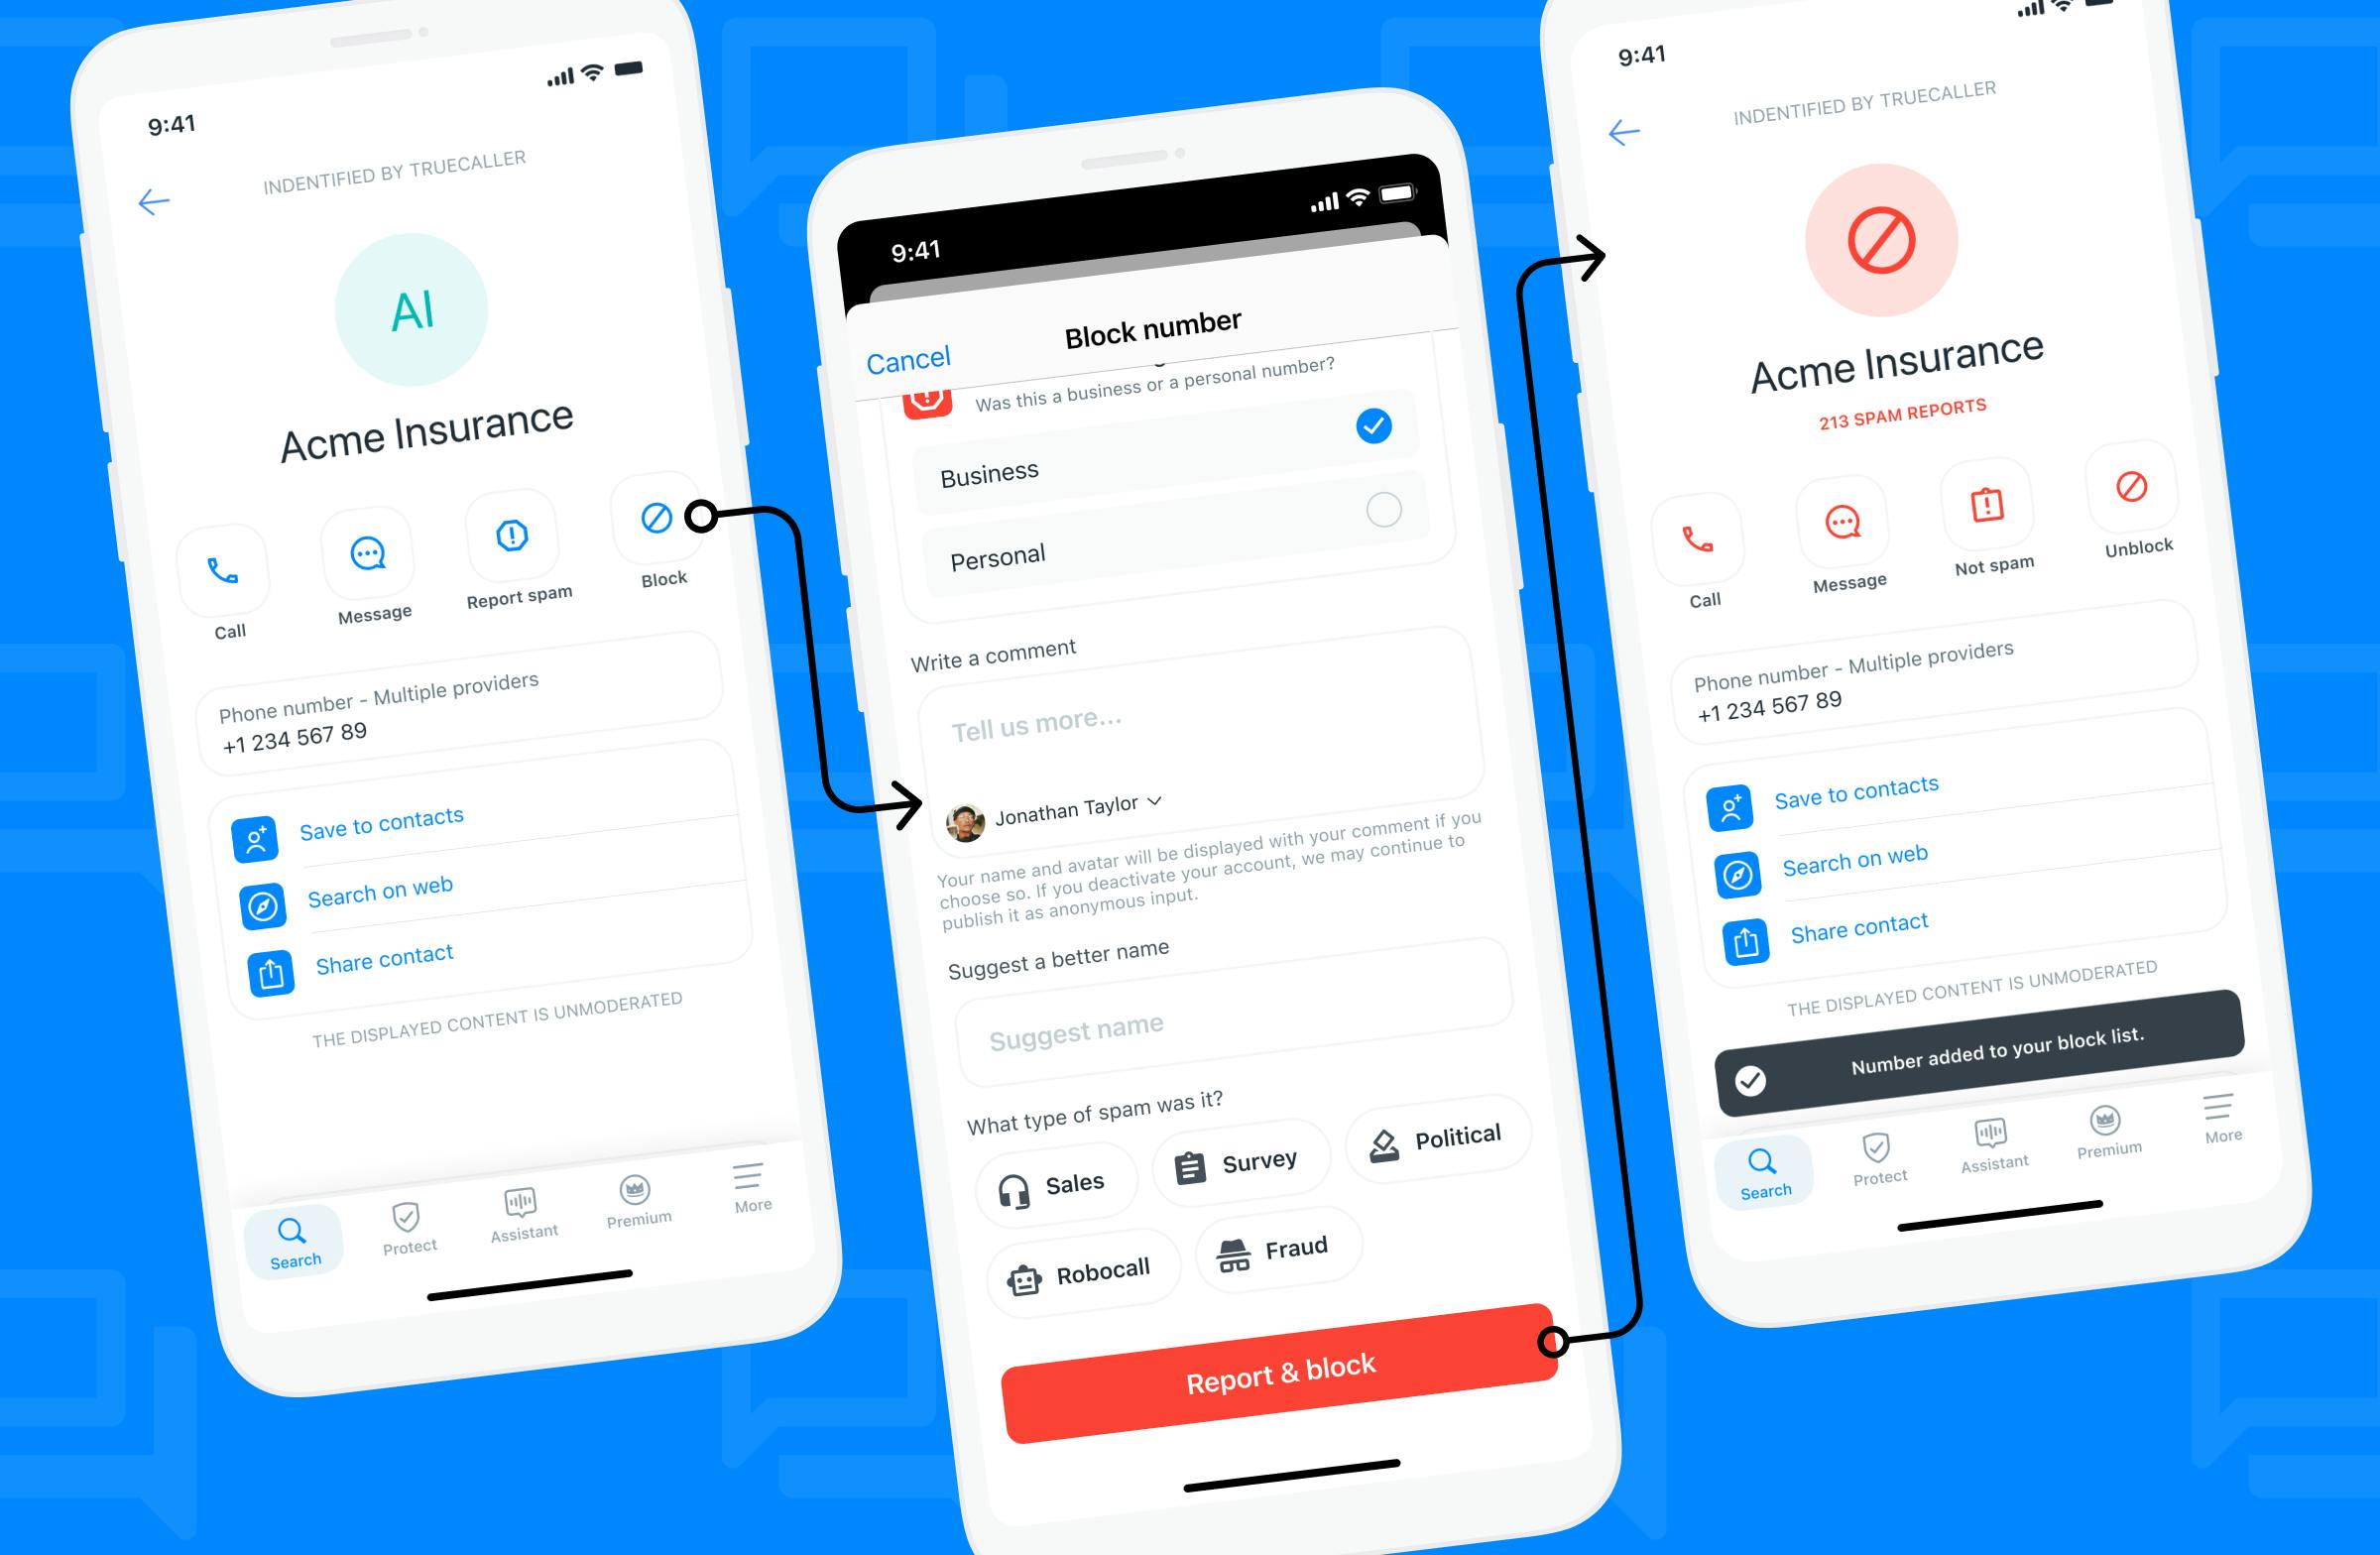 Illustration demonstrating the steps to add a comment on Truecaller app: 1. Open caller details, 2. Click on 'Block' (optional), 3. Comment section appears.